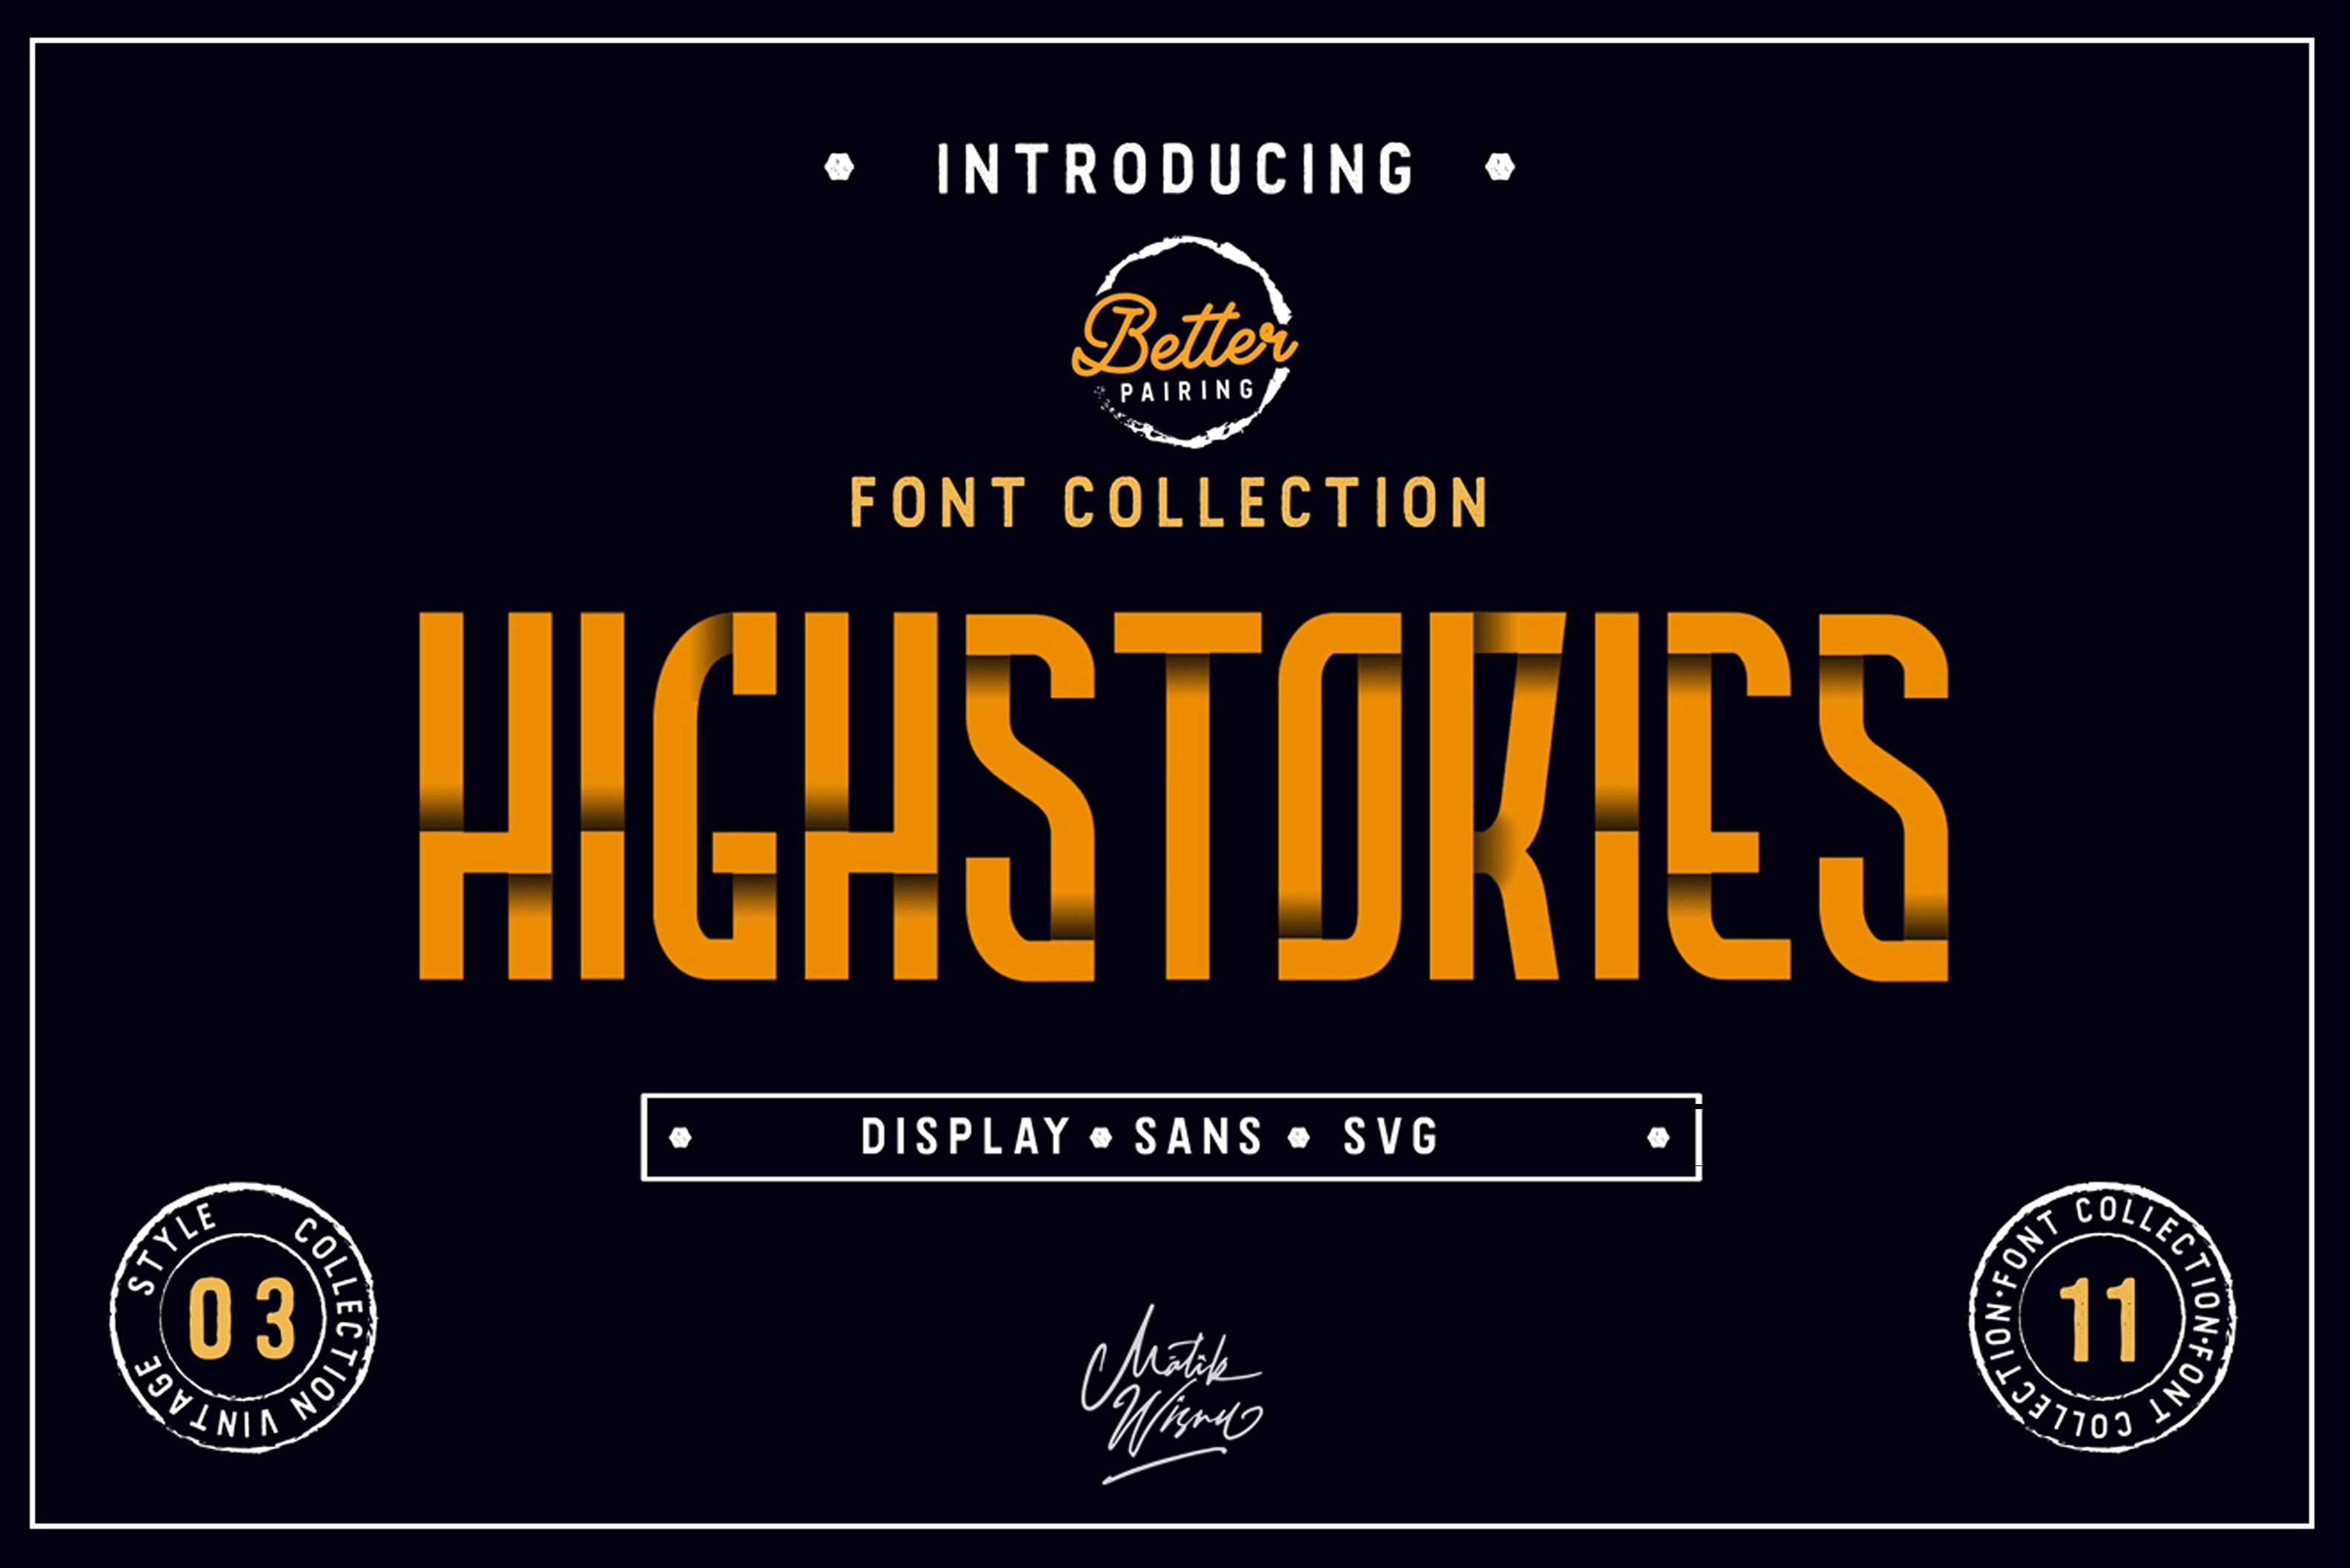 Highstories Family - Extra SVG